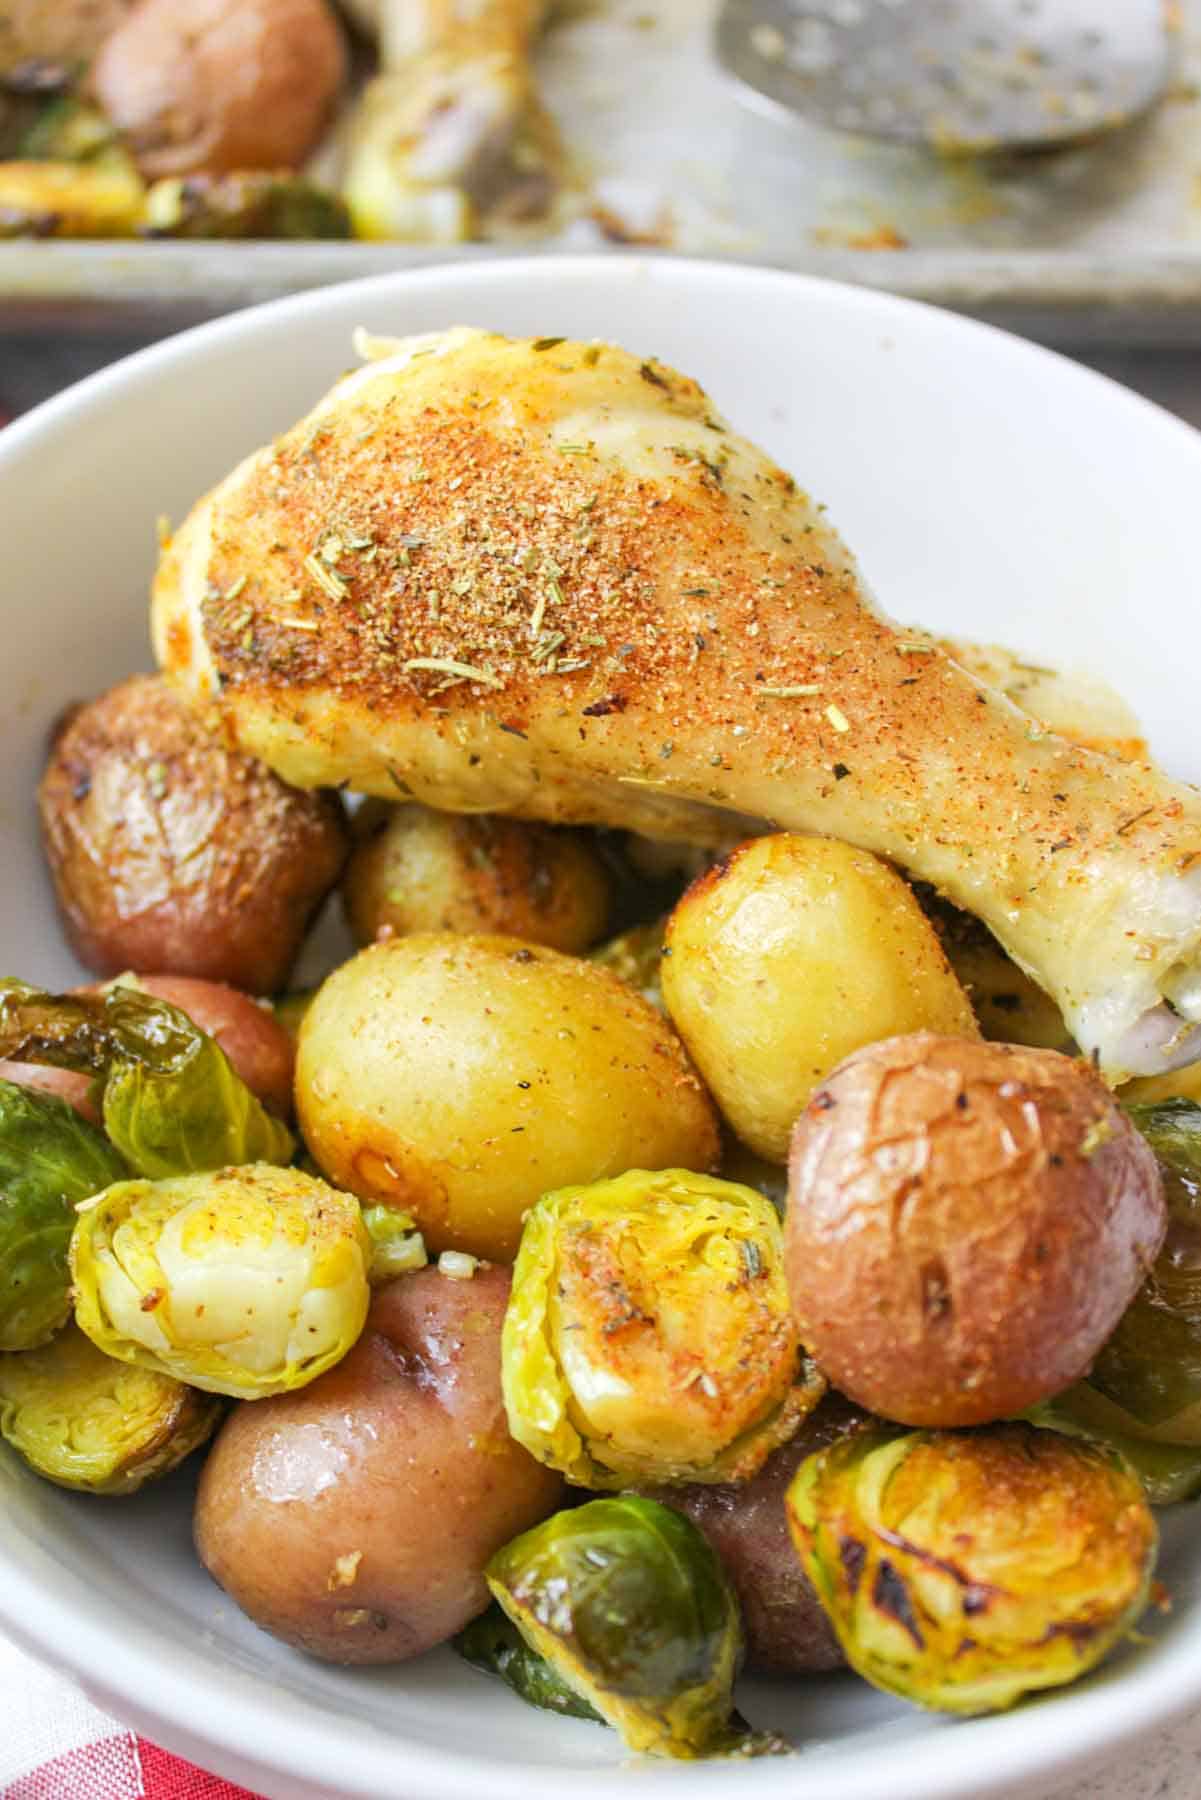 roasted baby potatoes, brussel sprouts and chicken legs in a bowl.